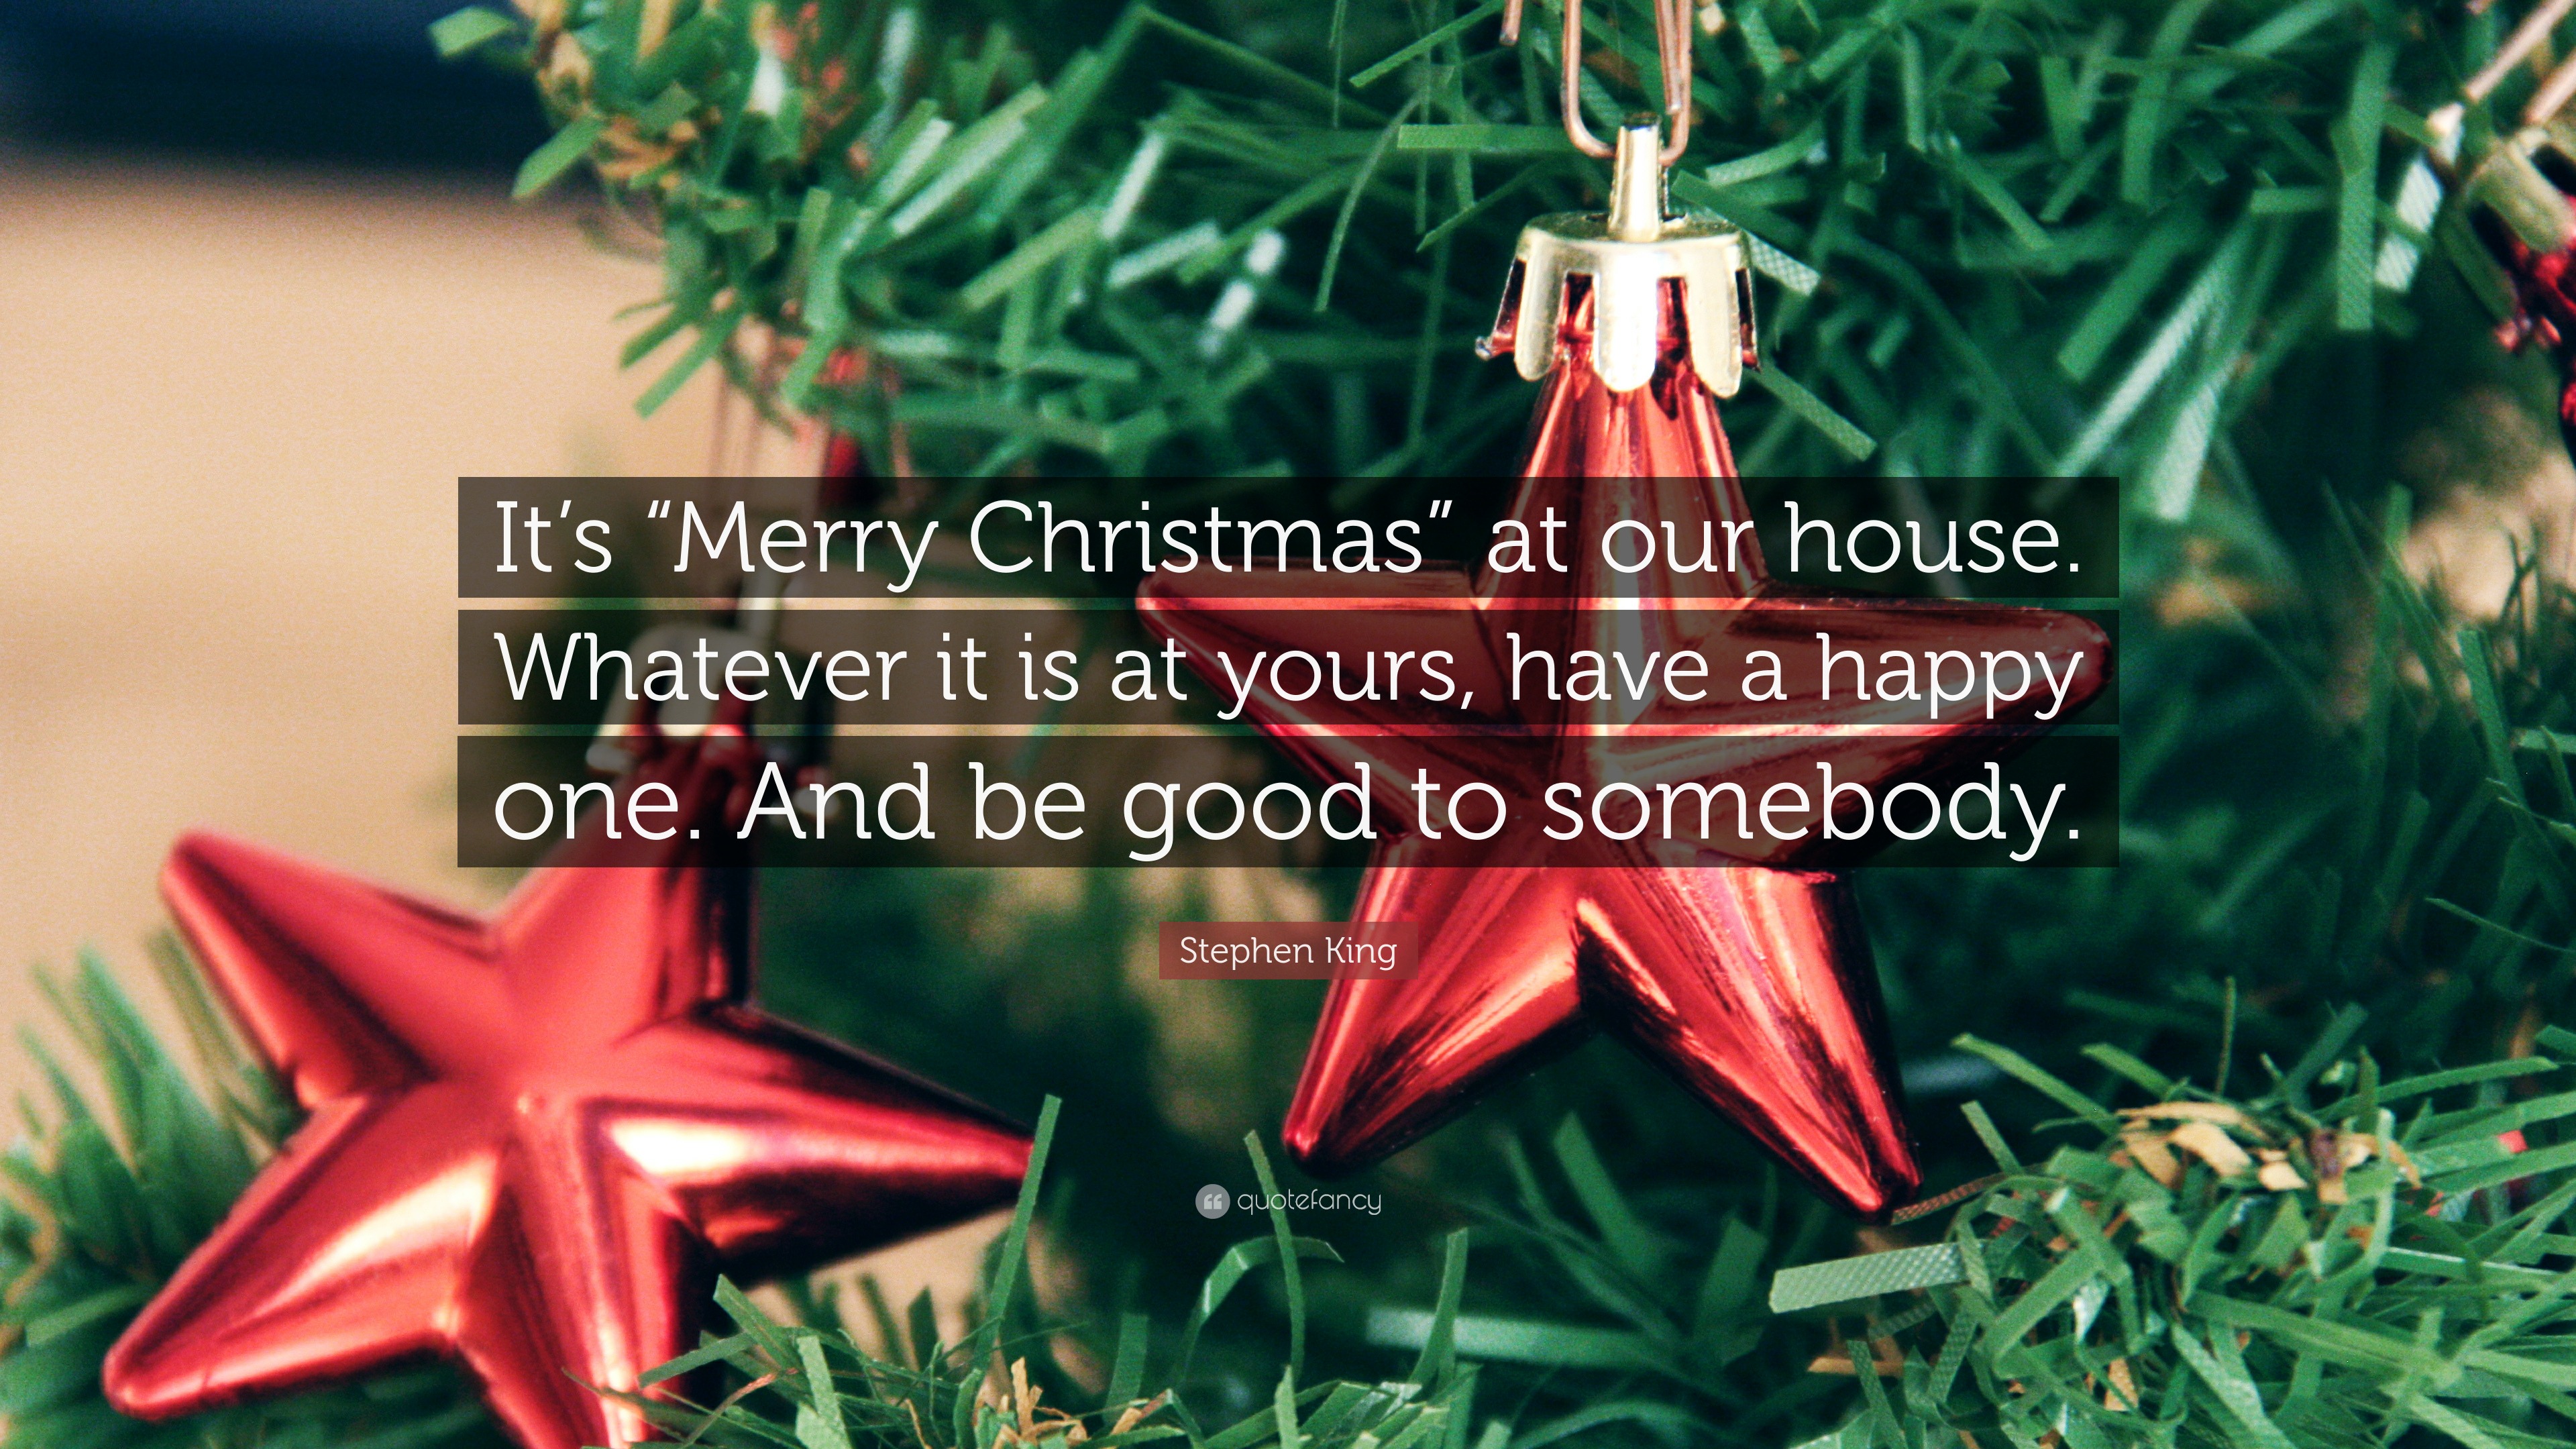 Stephen King Quote: “It's “Merry Christmas” At Our House. Whatever It Is At Yours, Have A